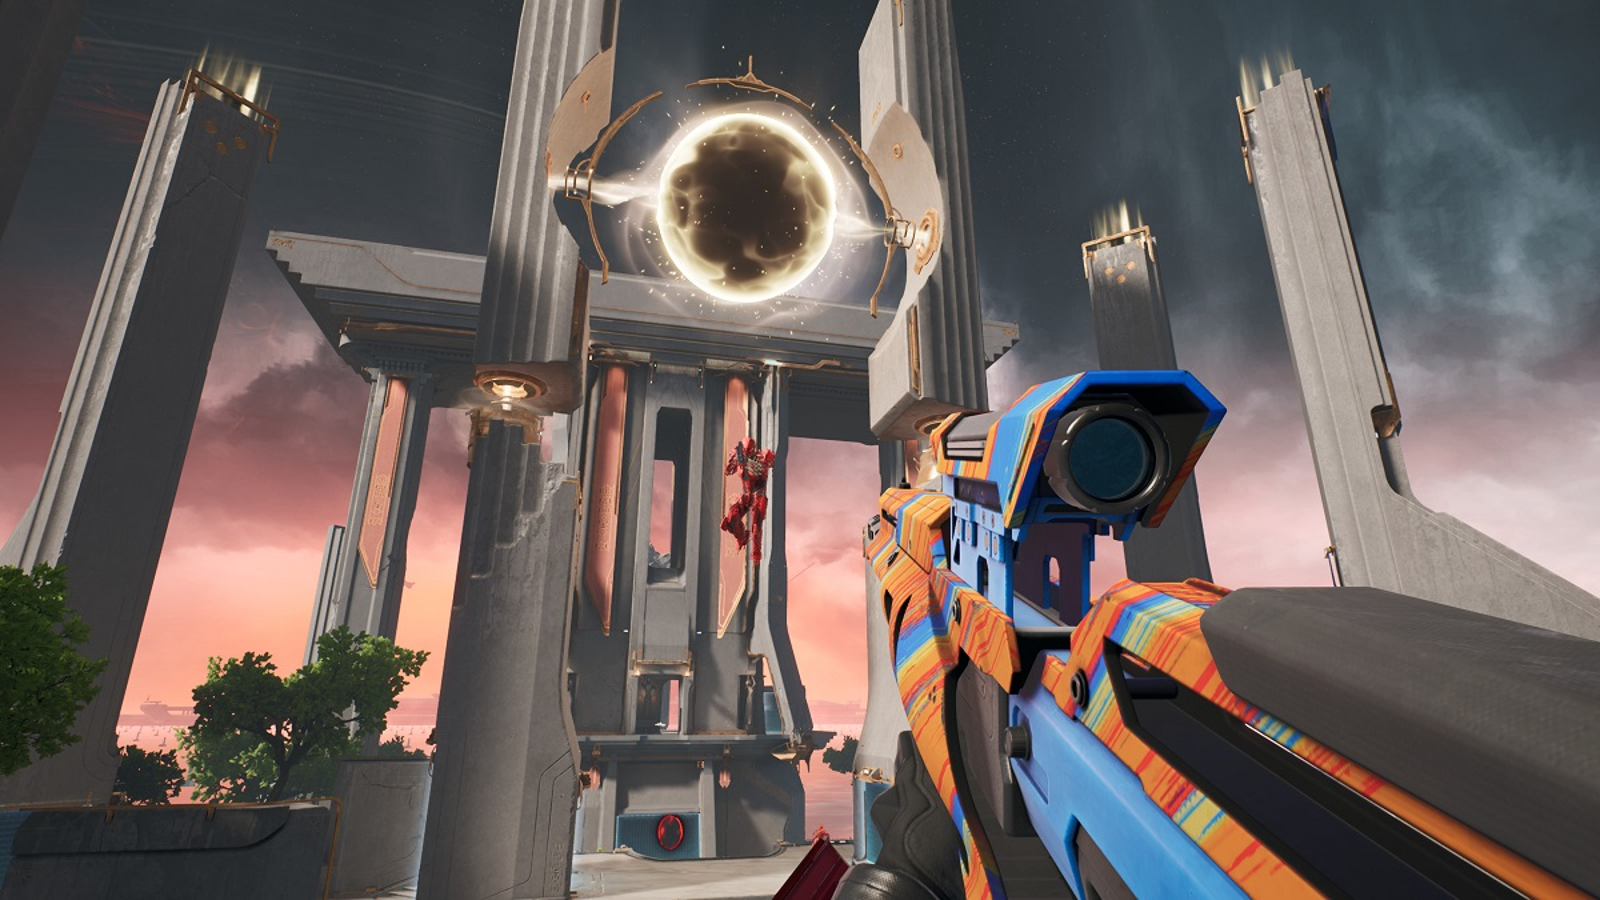 Splitgate developer announces new follow-up to the indie shooter